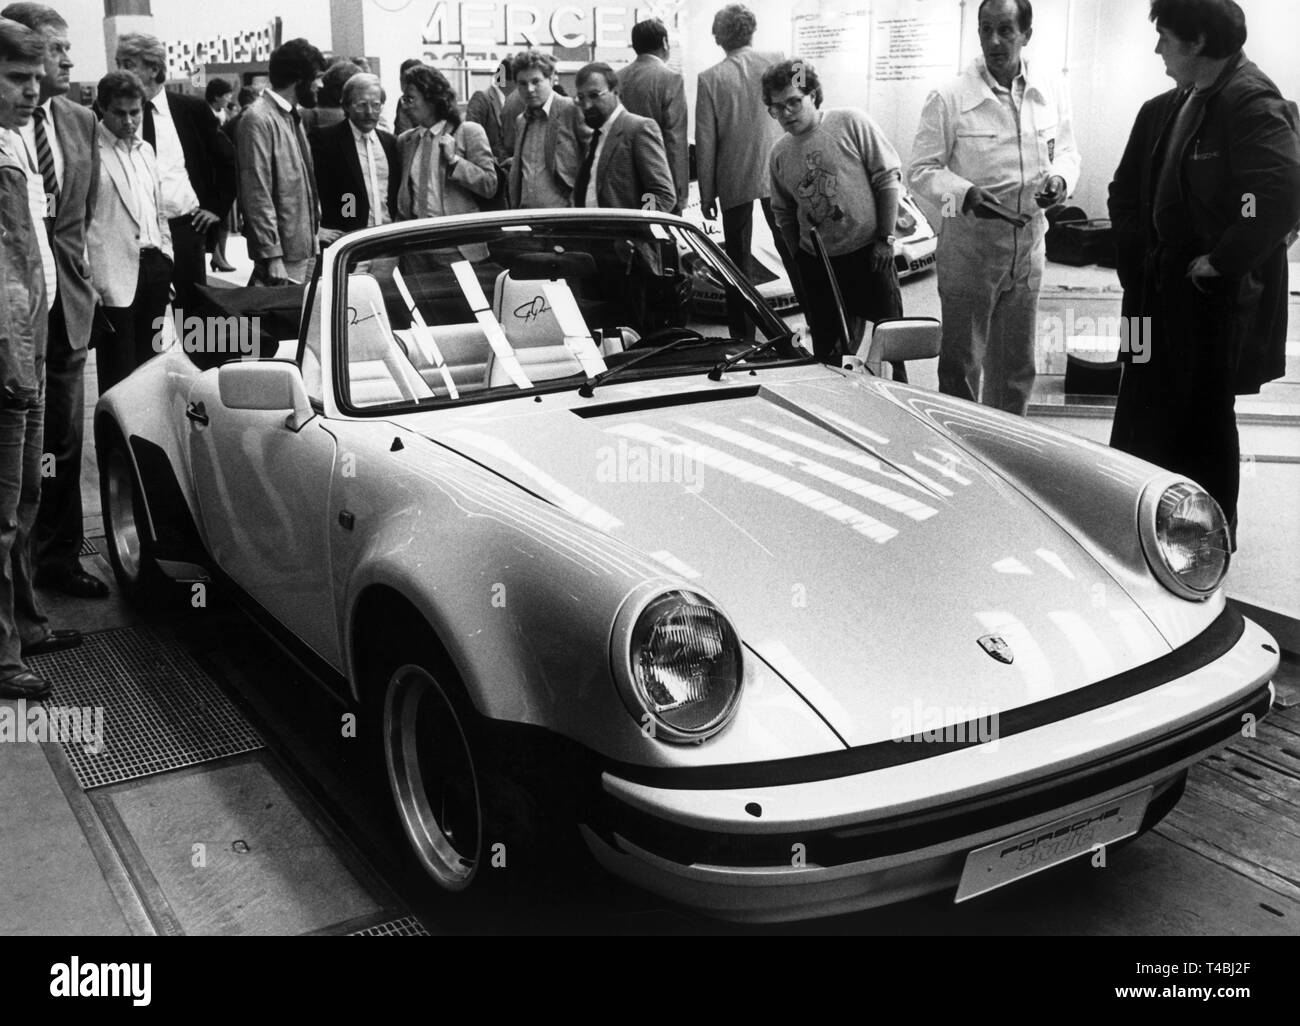 The probably first rear engine sports car of the world with four-wheel drive is presented on the International Automobile Exhibition in Frankfurt on the Main on 16 September 1981. It is about the study of a Porsche 911 turbo. The International Automobile Exhibition is opened officially on 17 September 1981. | usage worldwide Stock Photo